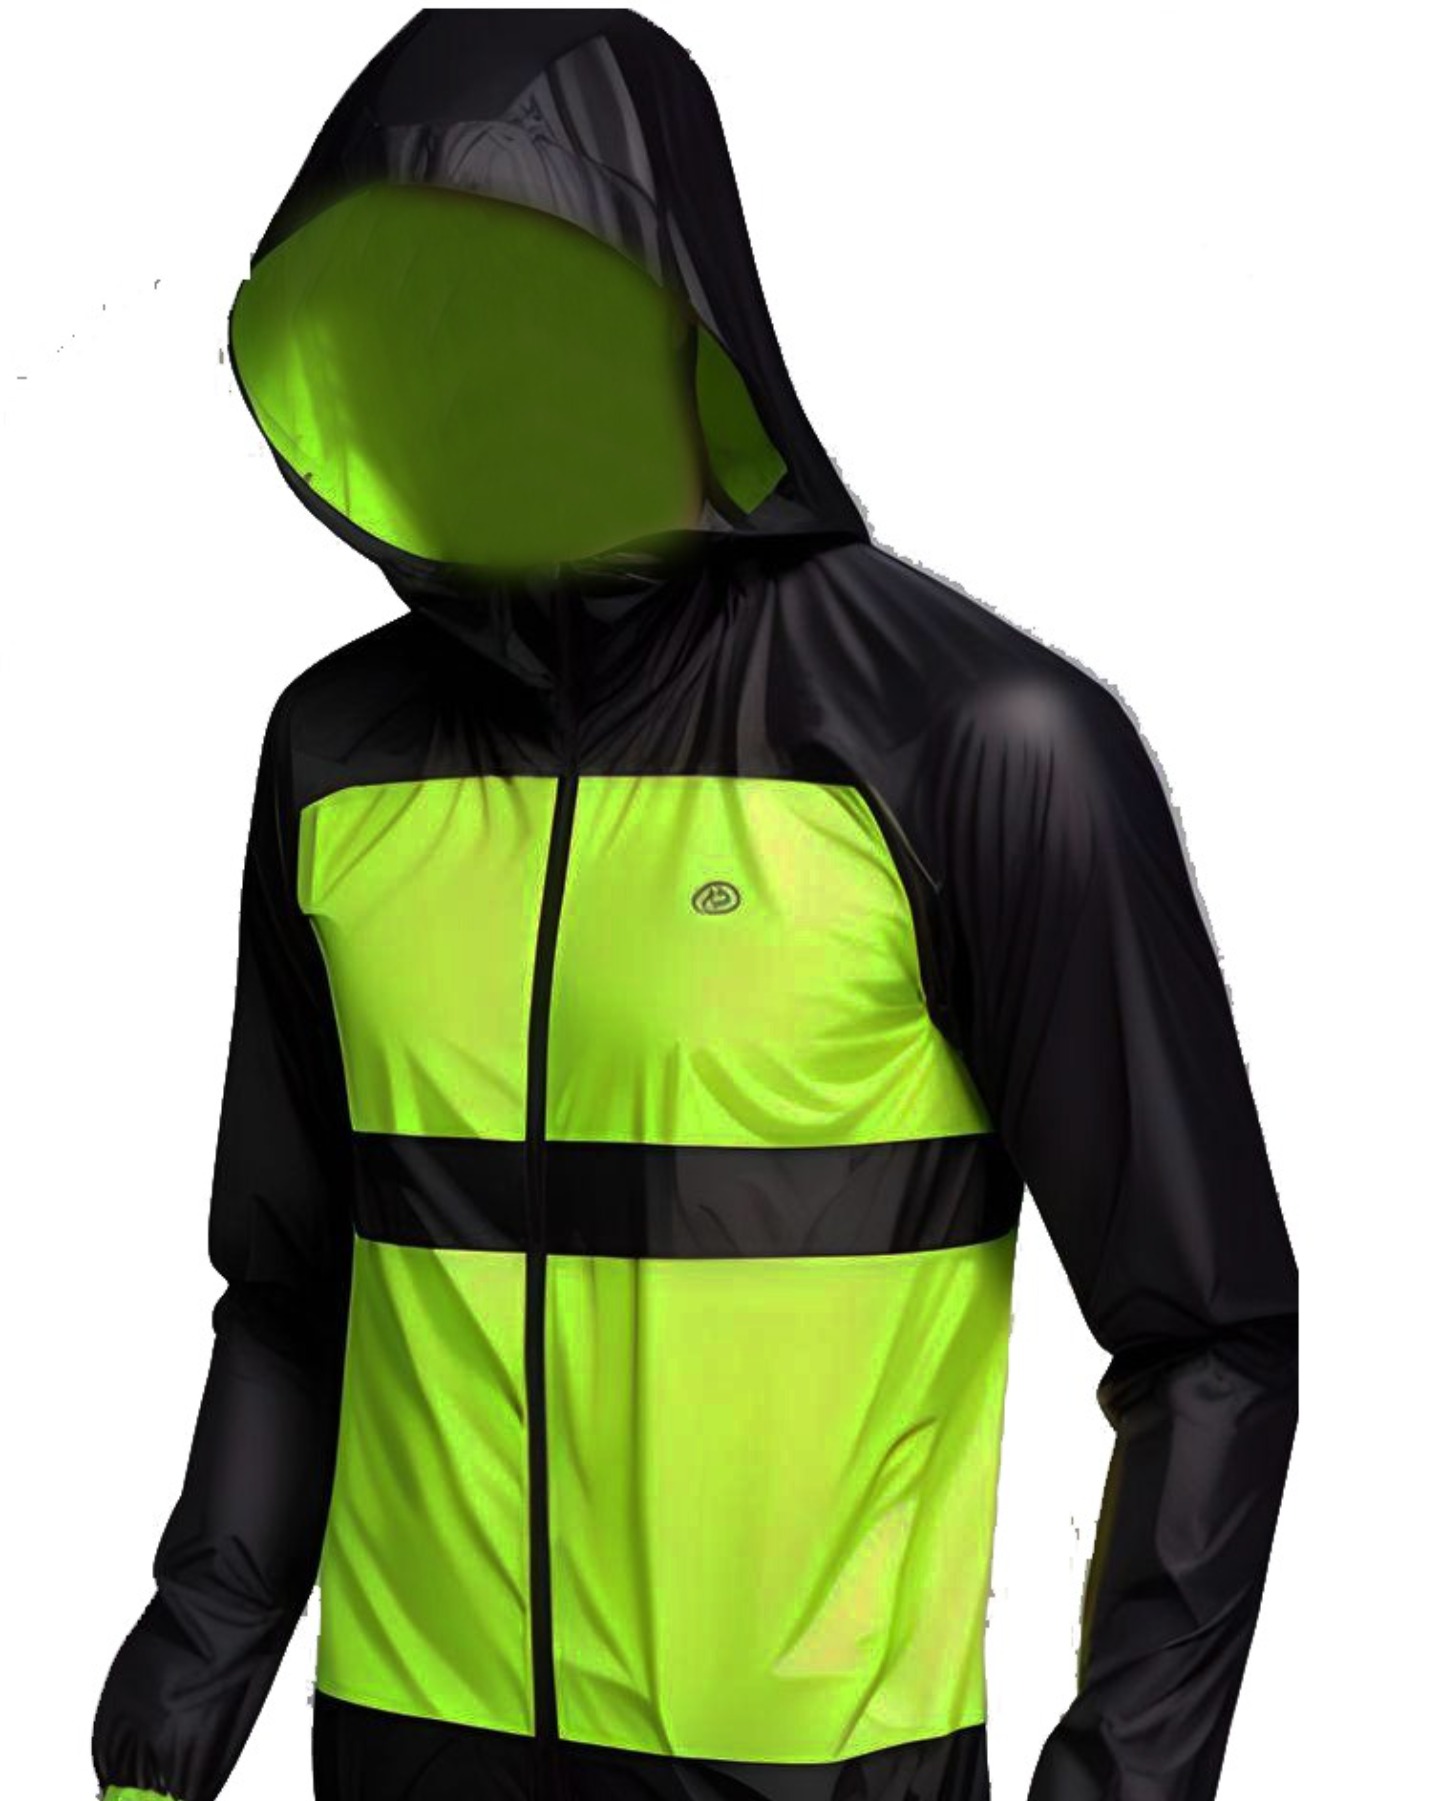 ODM rain jackets for every adventure, made in Bangladesh - Garment  manufacturer clothing supplier-Signal Sportswear